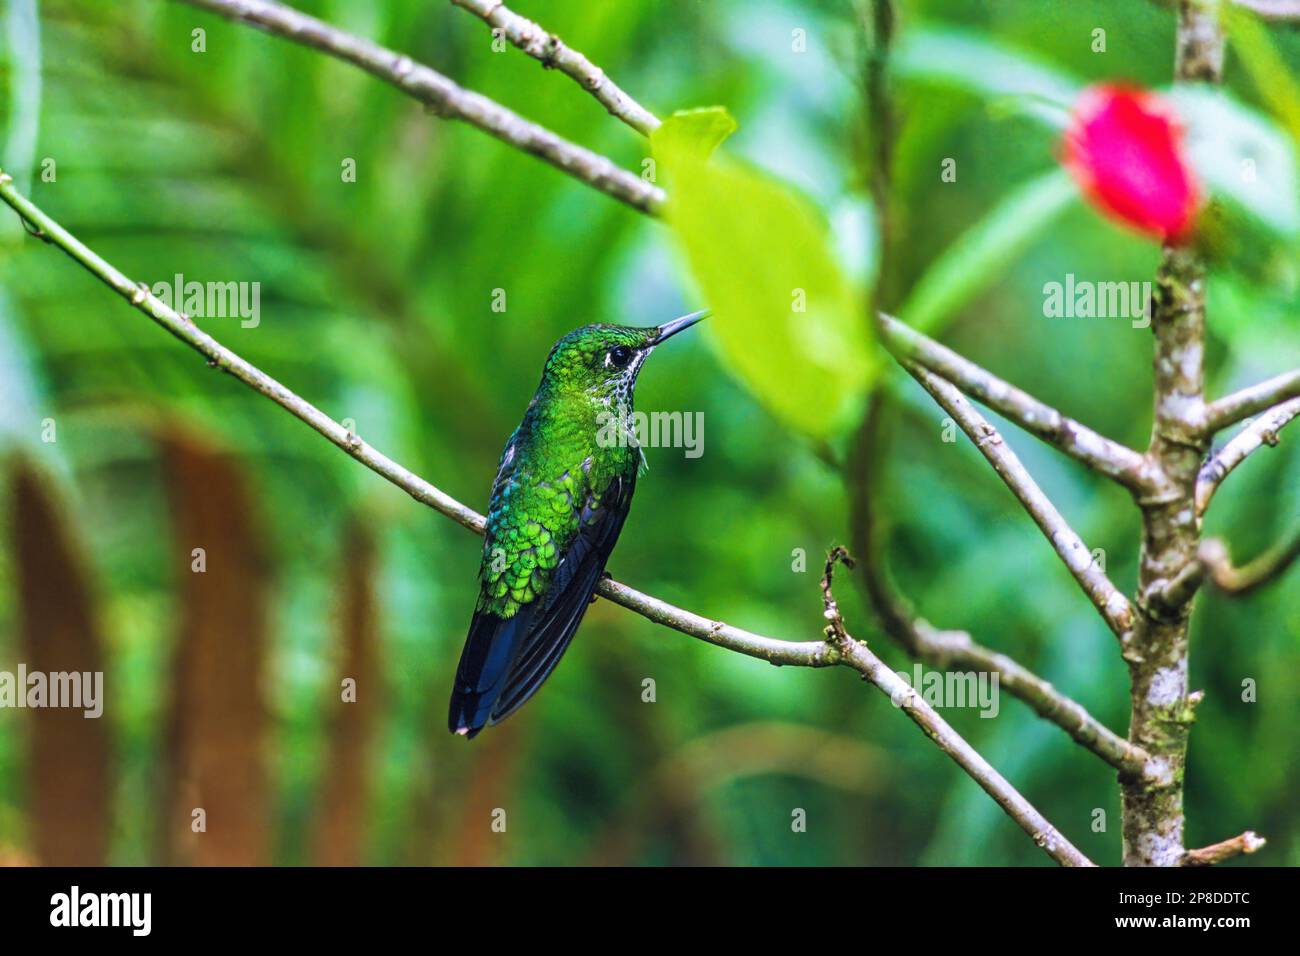 Hummingbird on a tree branch in a rainforest Stock Photo